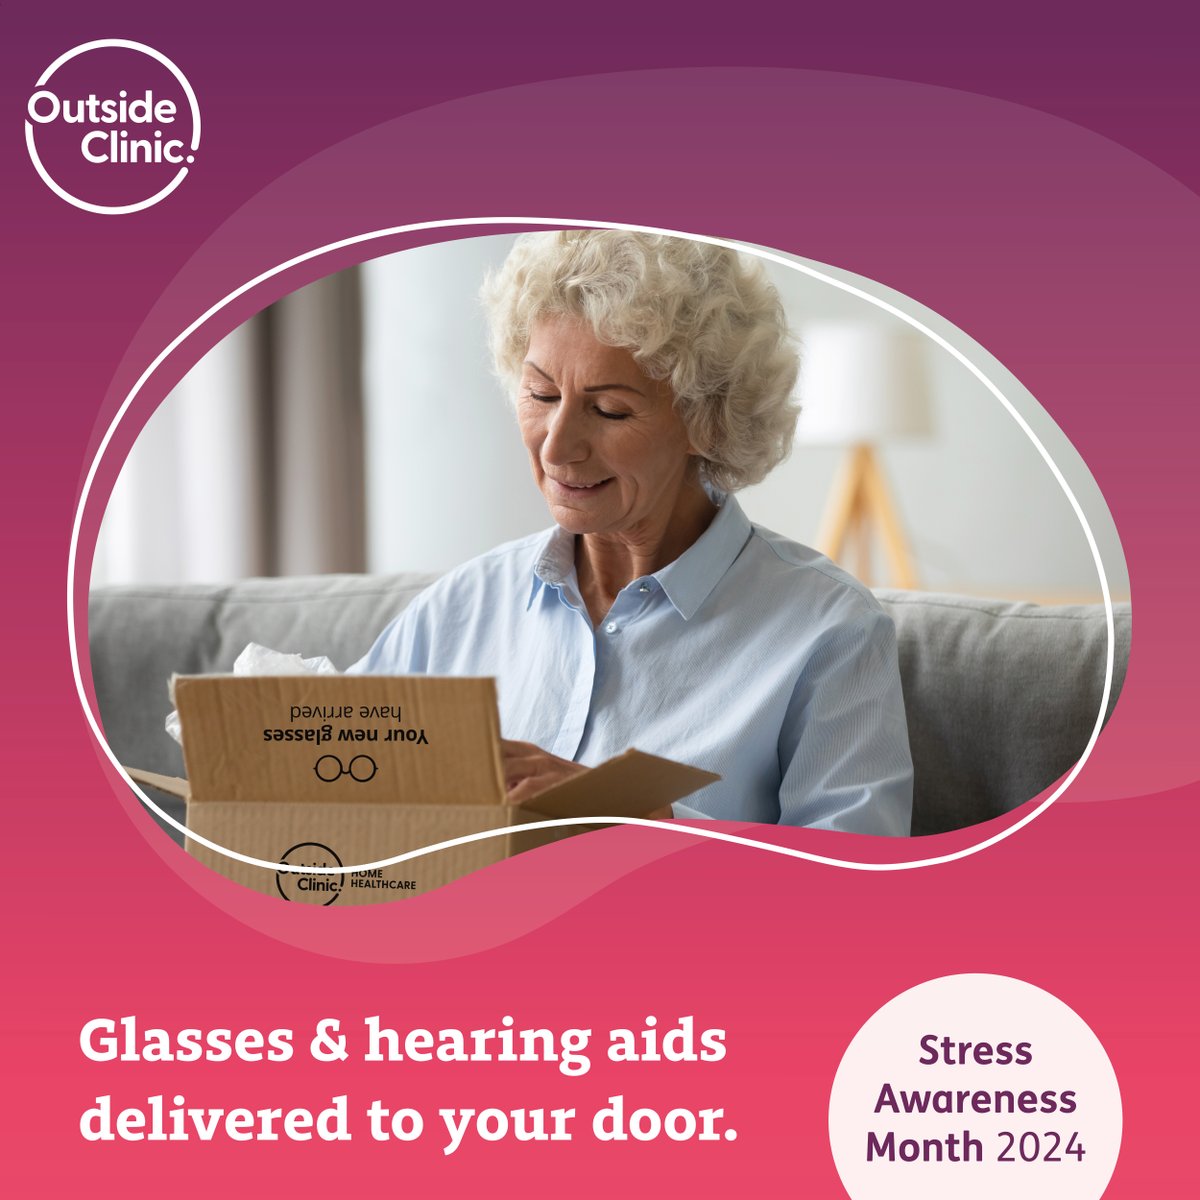 Glasses and hearing aids delivered straight to your door! 📦 In Stress Awareness Month, we're reminding you how easy and hassle-free getting the right support can be. #BetterLiving #StressAwarenessMonth